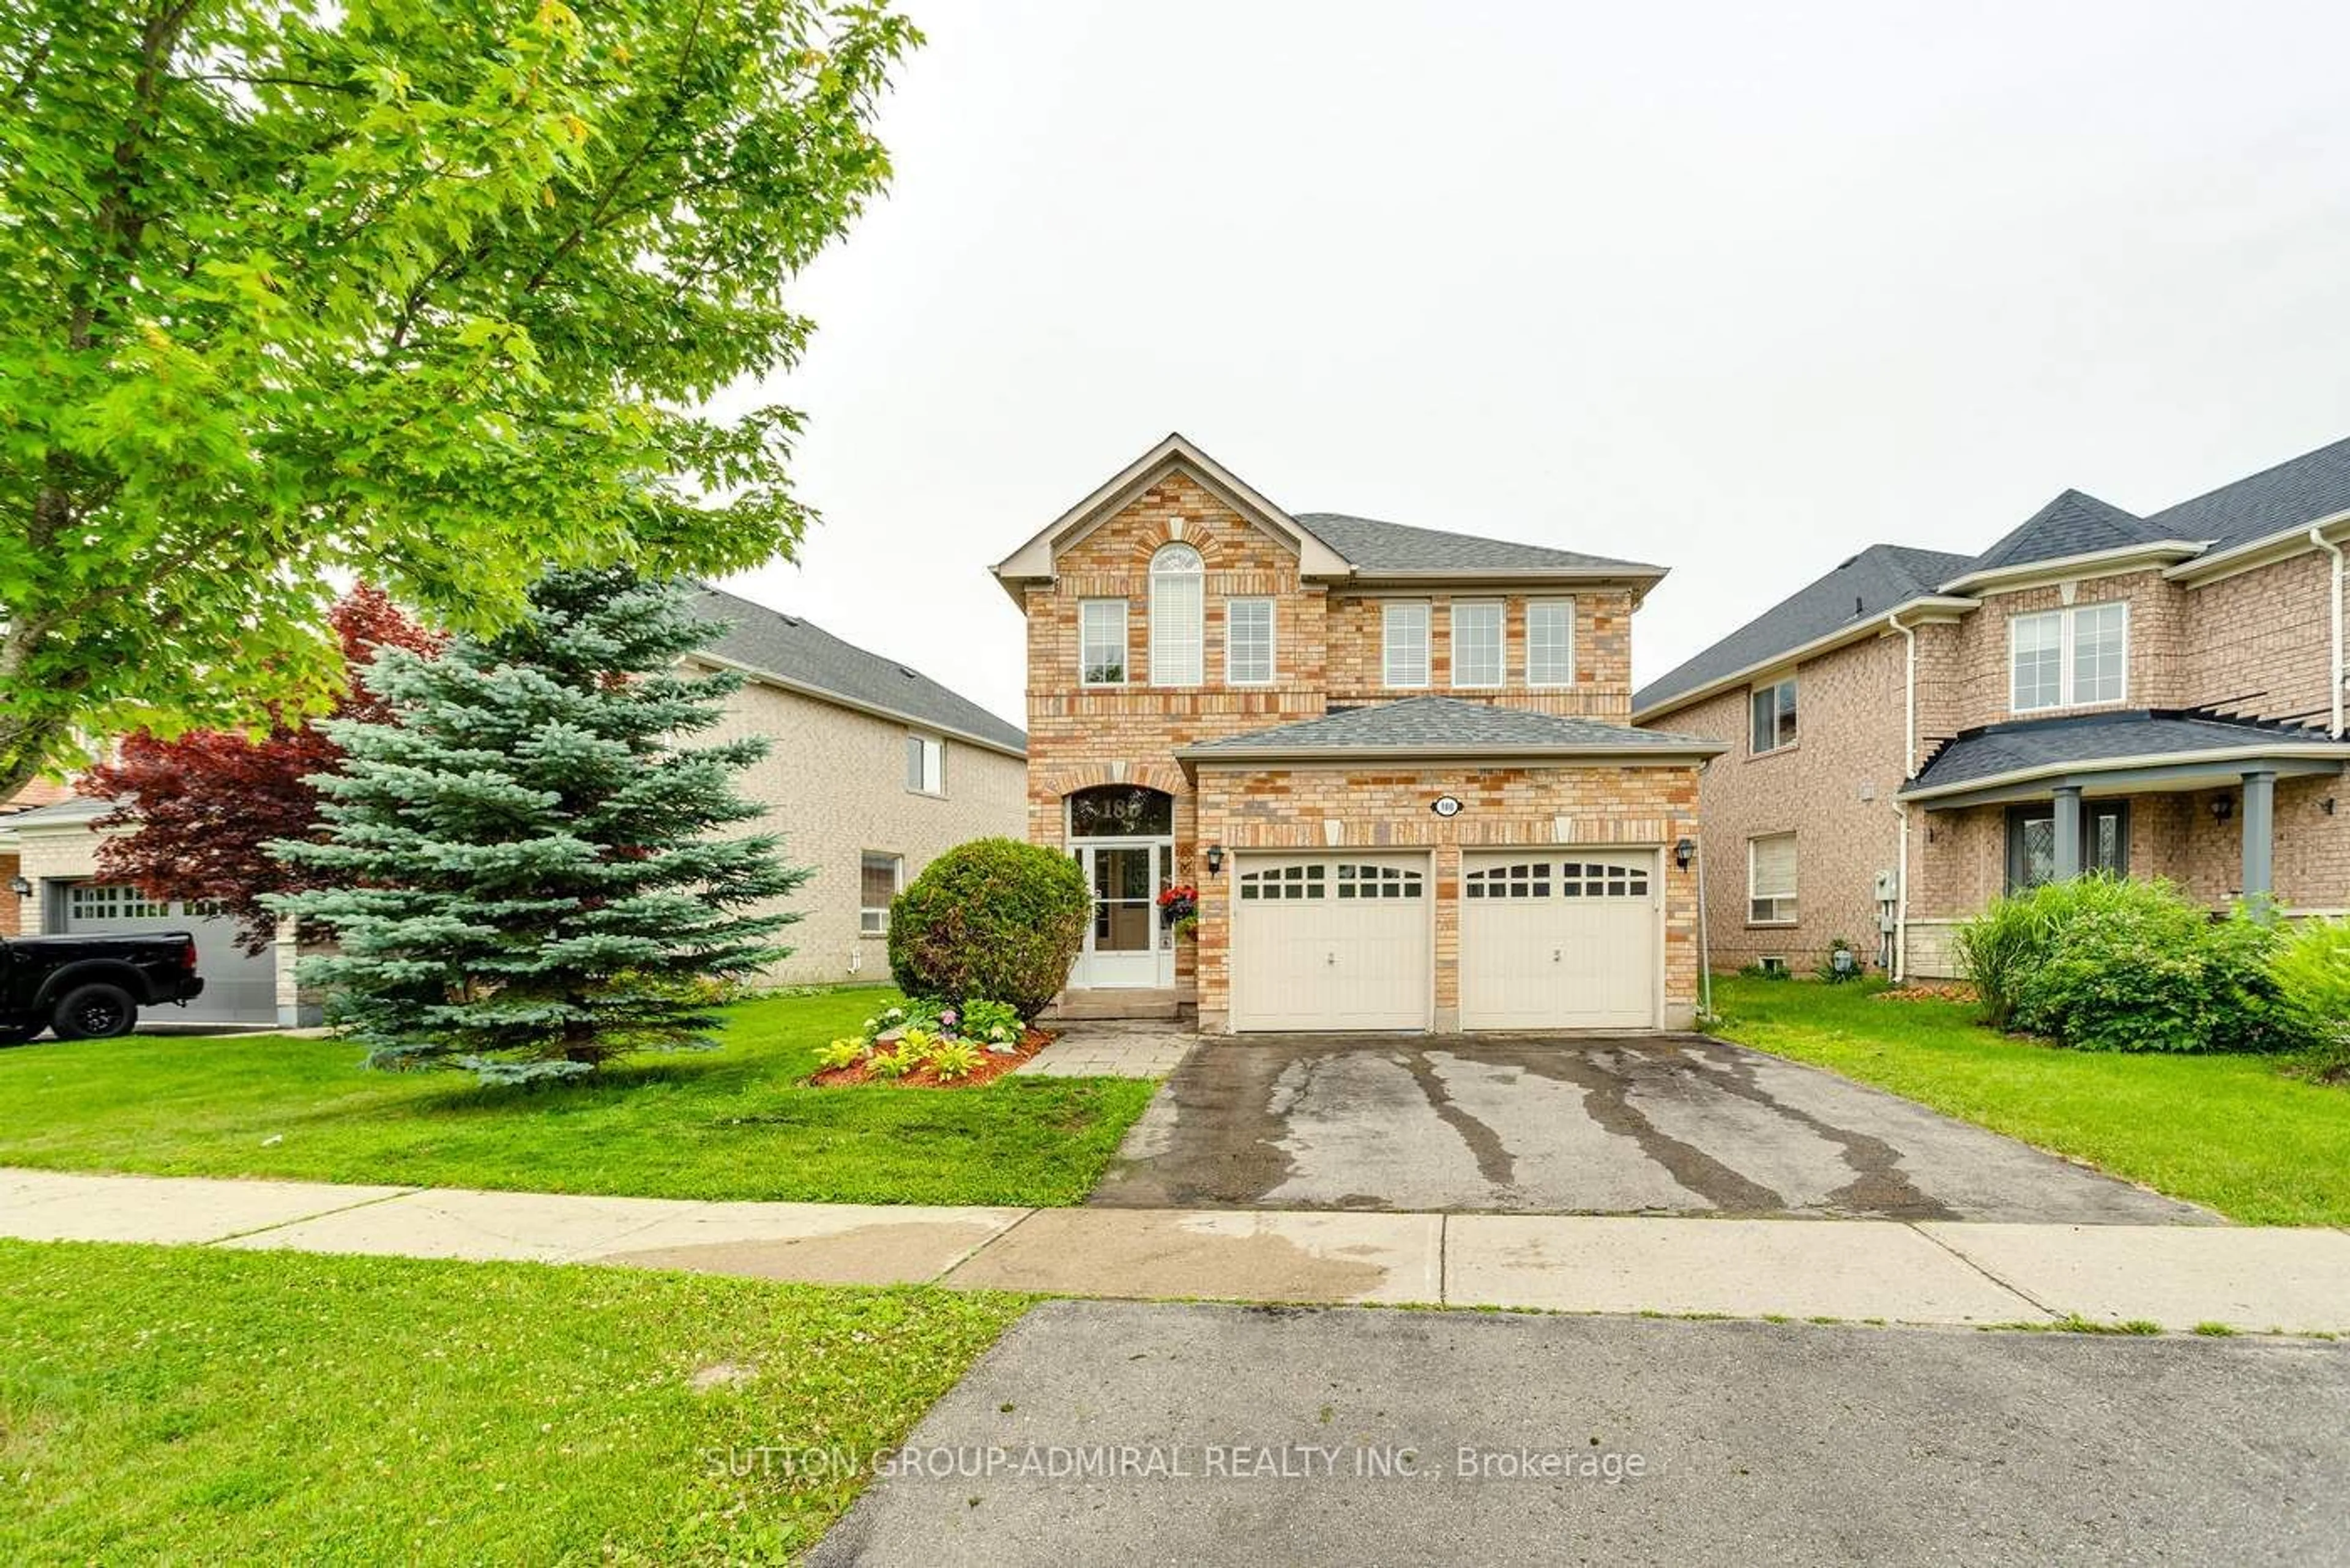 Frontside or backside of a home for 180 Worthington Ave, Richmond Hill Ontario L4E 4N7